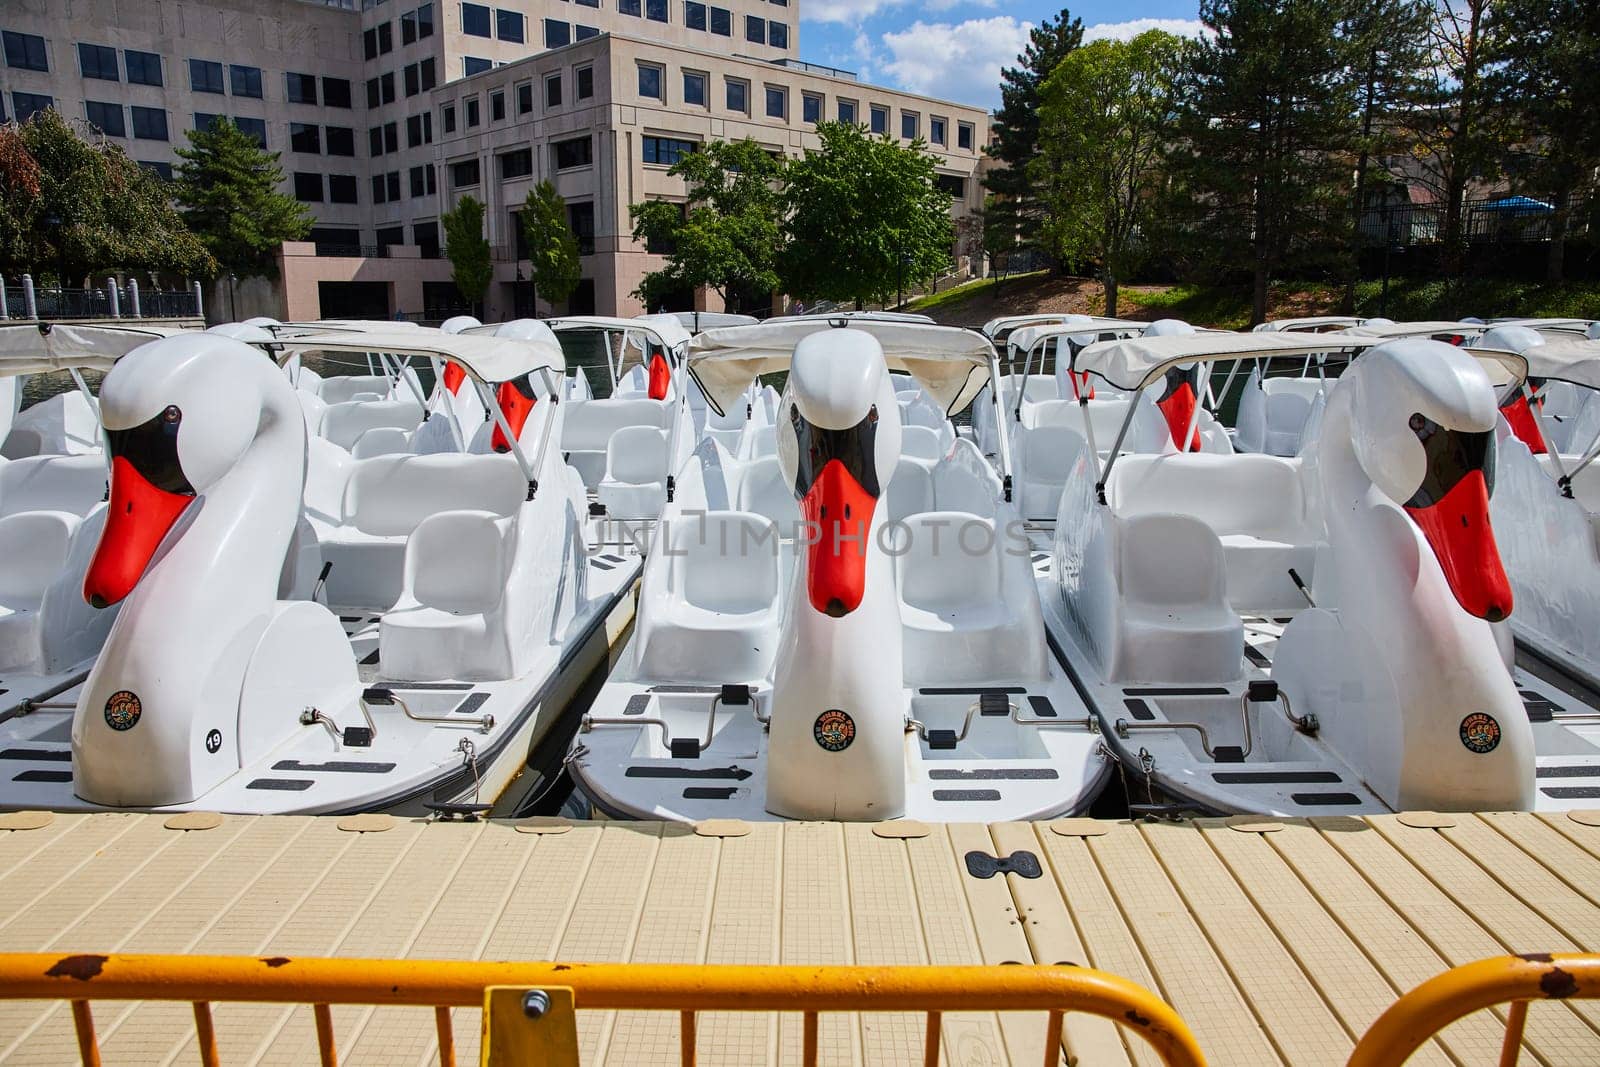 Swan Pedal Boats Docked in Urban Park with City Backdrop by njproductions